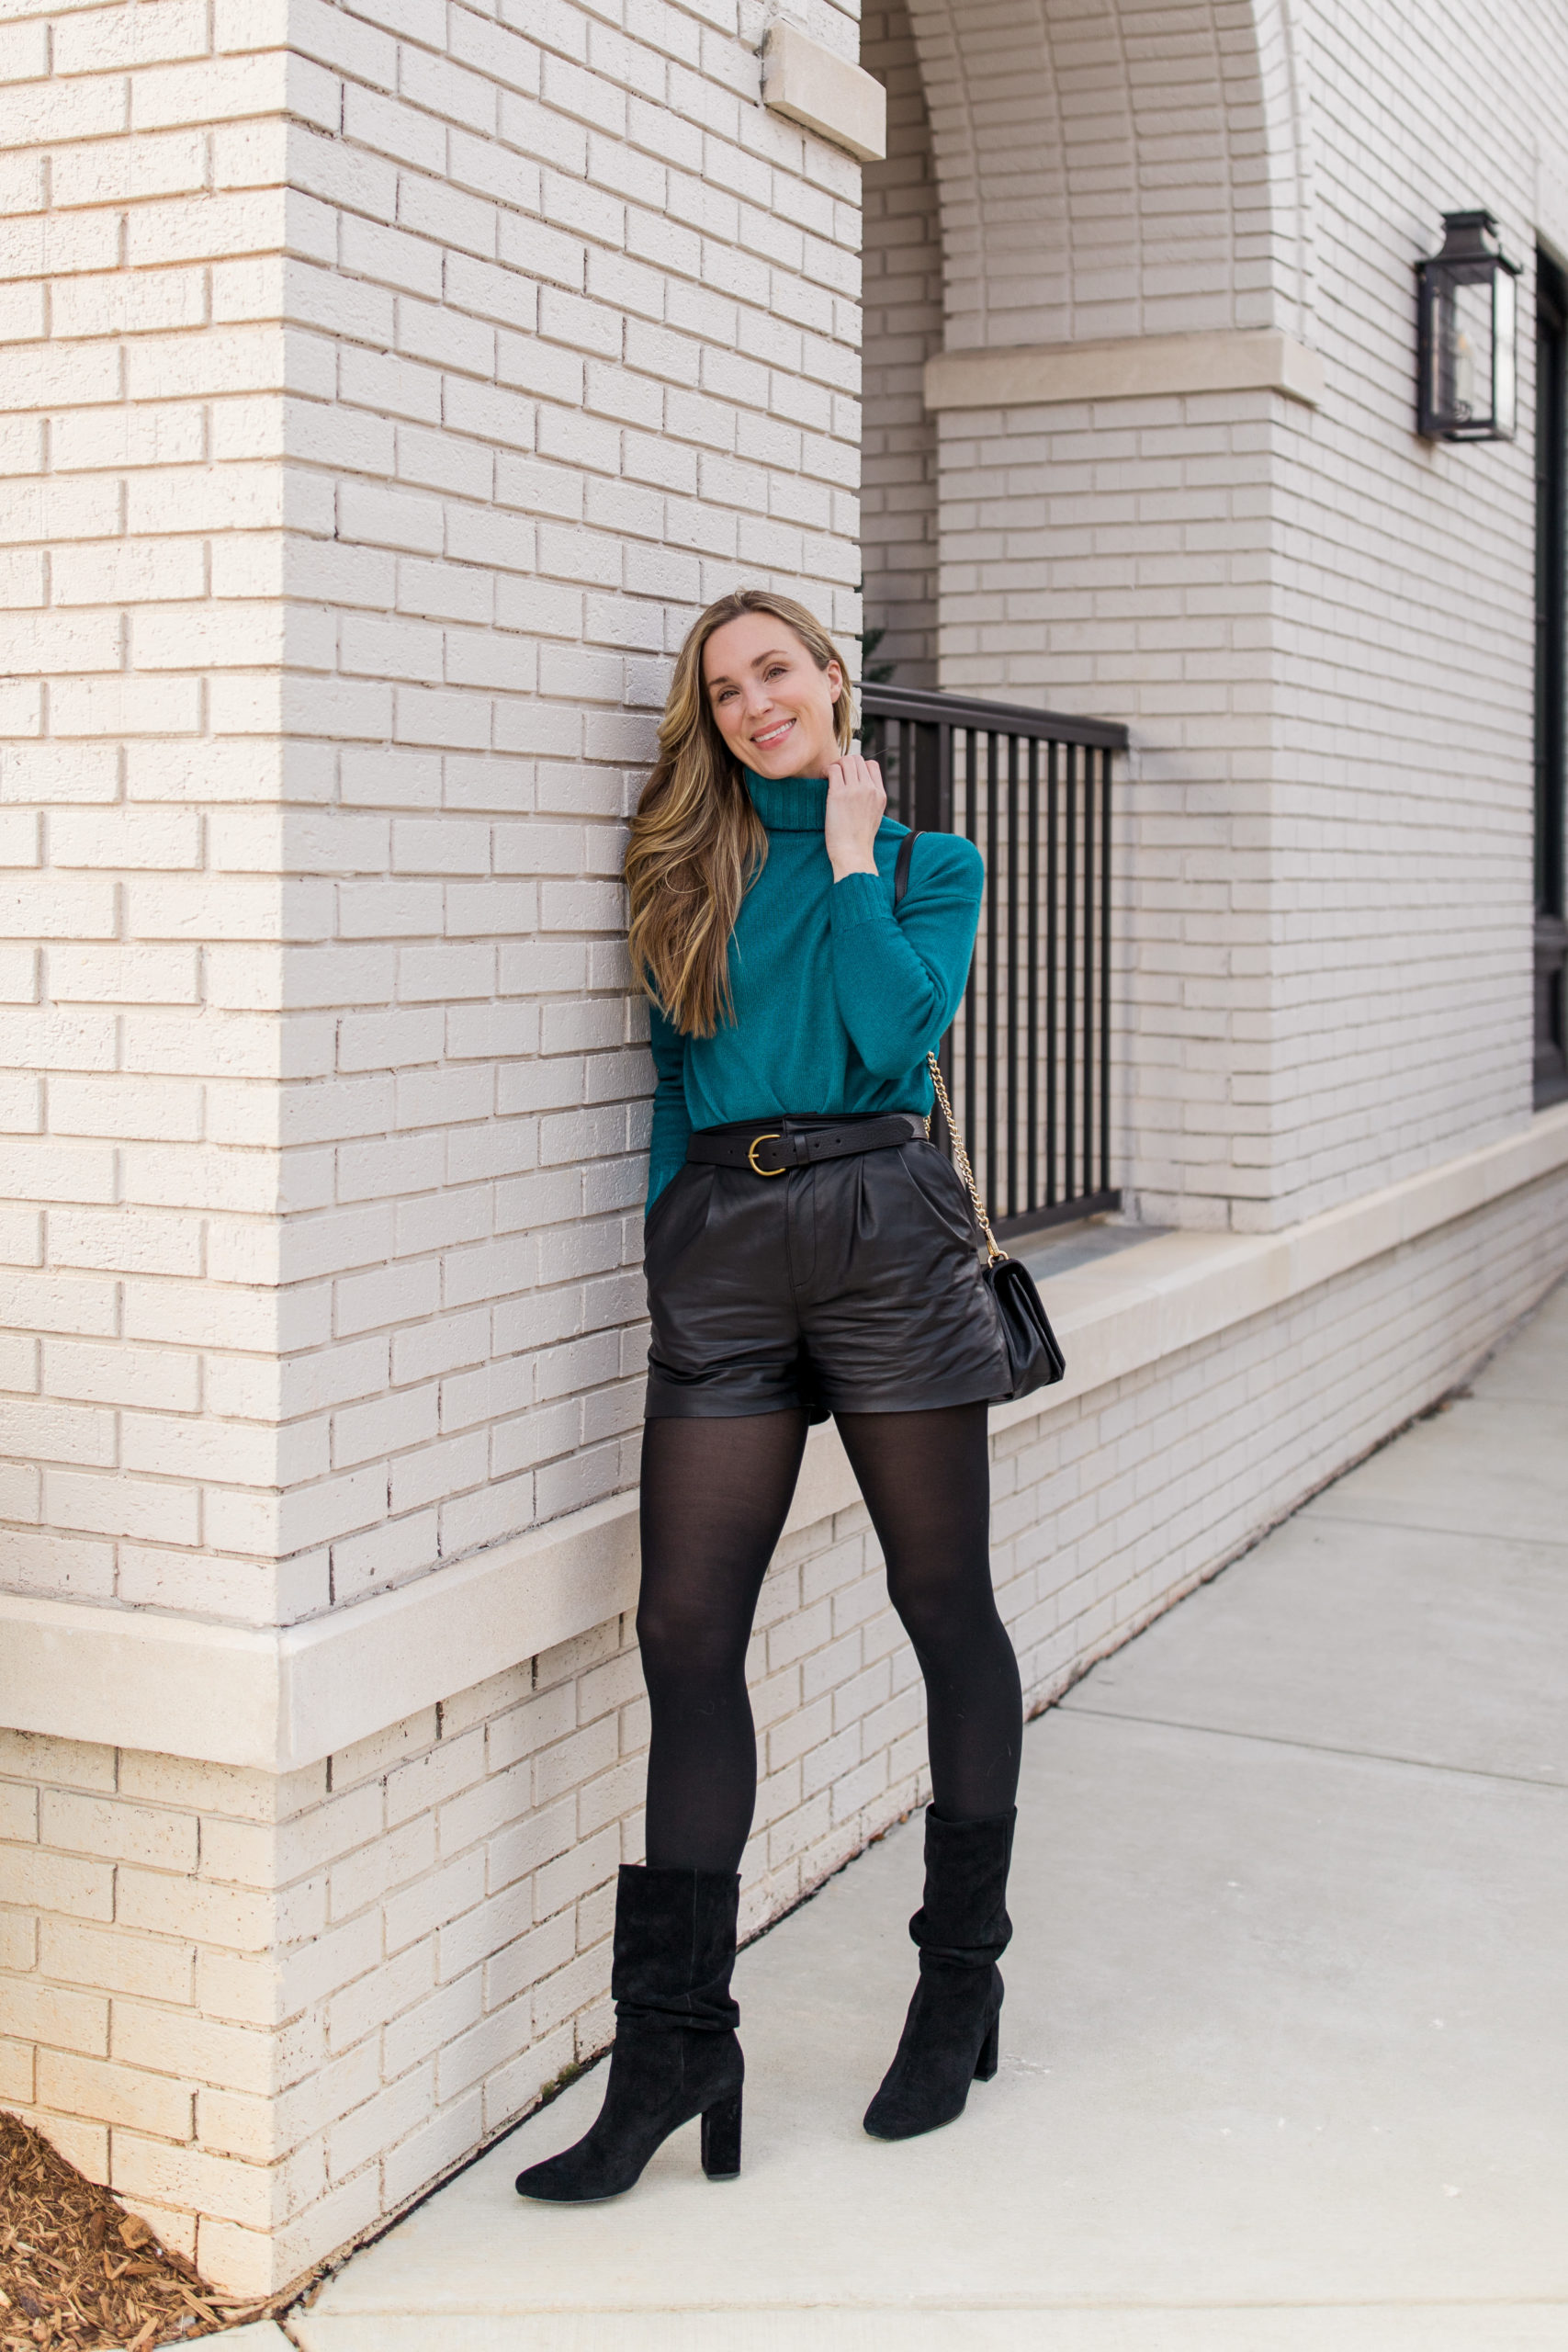 HOW TO STYLE: LEATHER LEGGINGS! From day, to night, to relaxing